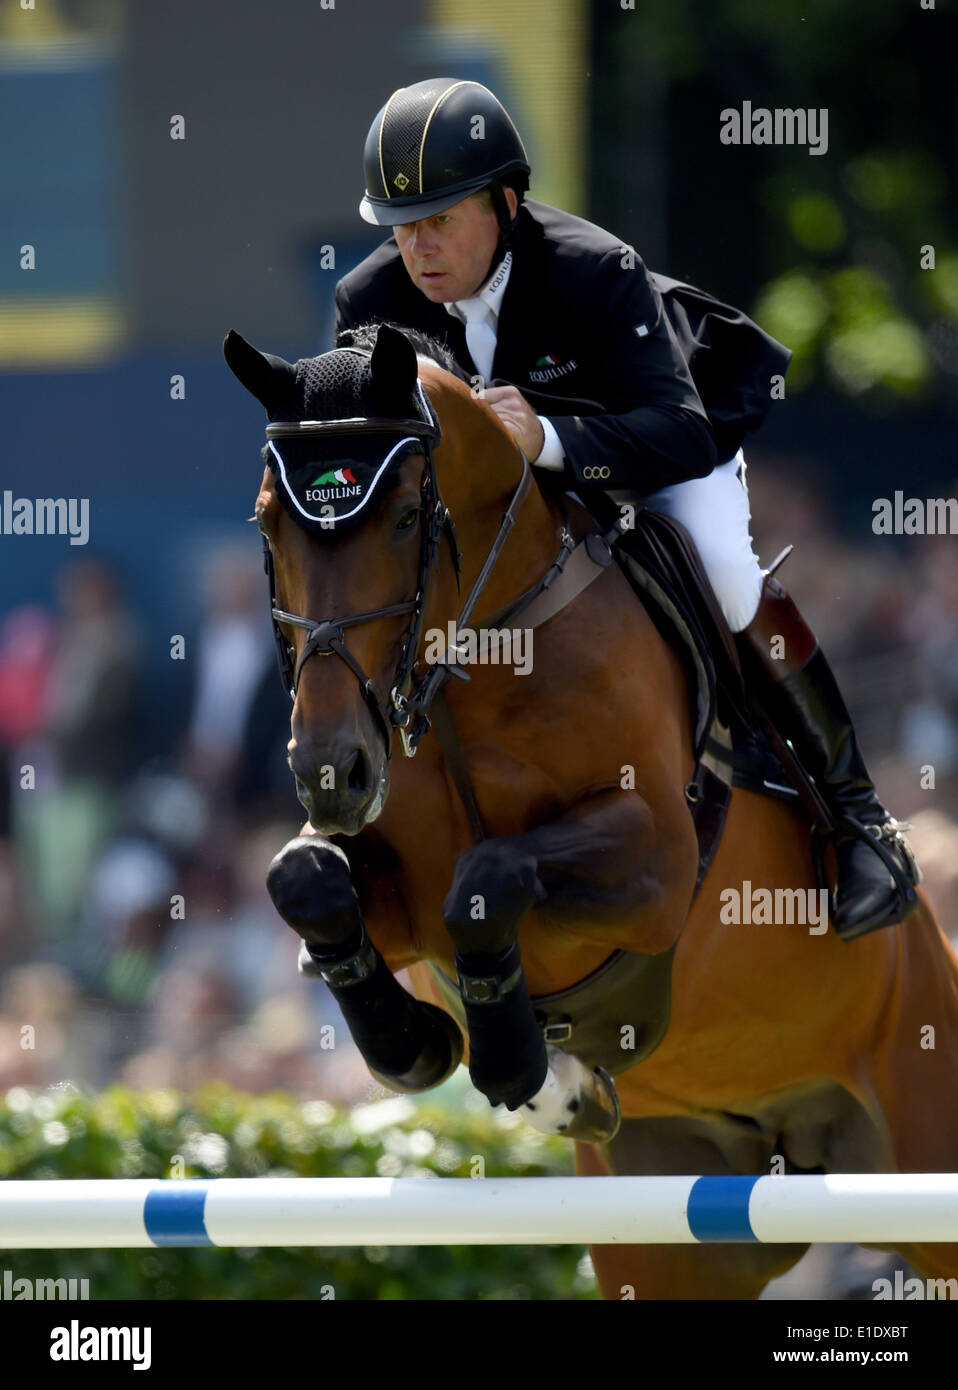 Hamburg, Germany. 31st May, 2014. Nick Skelton (Britain) on Big Star at the Great Prize of Hamburg as part of the 2014 Global Champions Tour in Hamburg, Germany, 31 May 2014. The German Show Jumping and Dressage Tournament takes place until 01 June. Photo: DANIEL REINHARDT/dpa/Alamy Live News Stock Photo